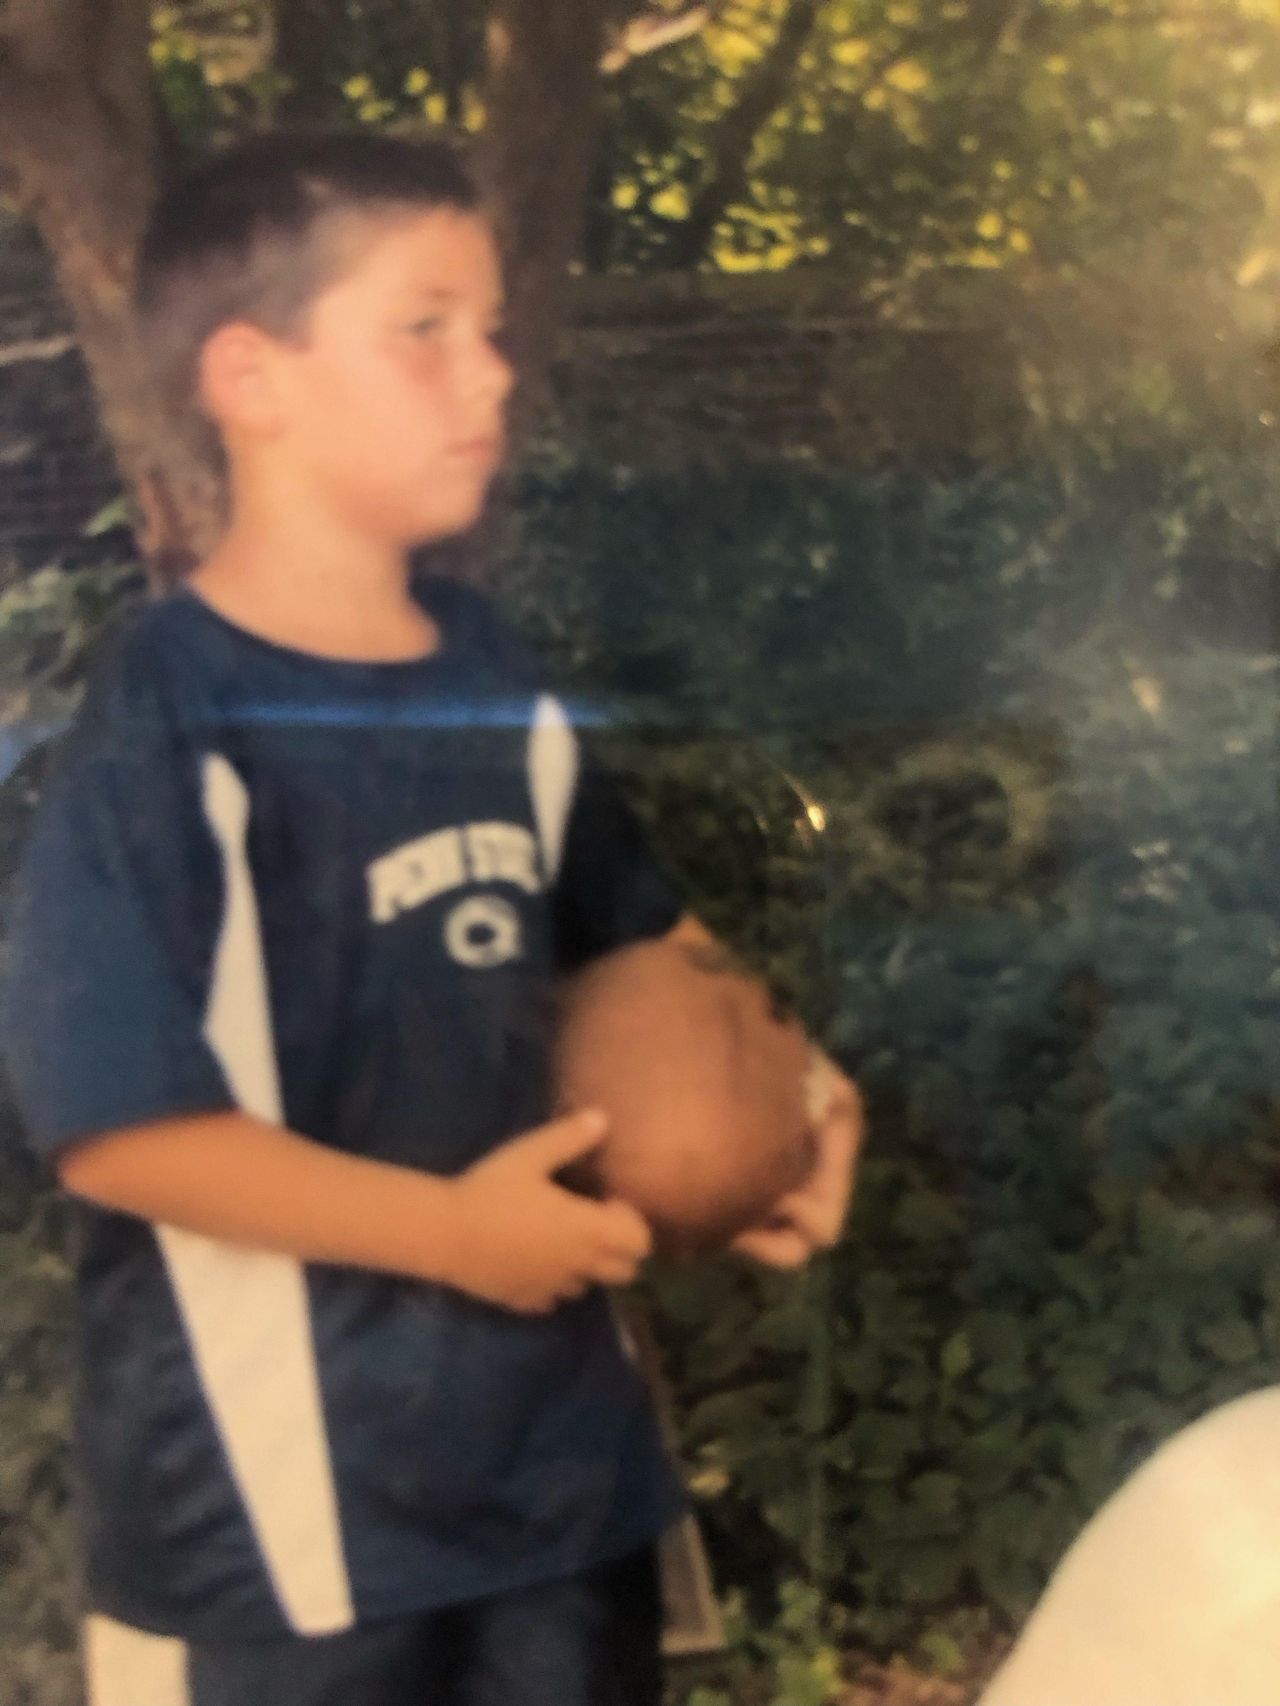 Jon repping Penn State football at a young age